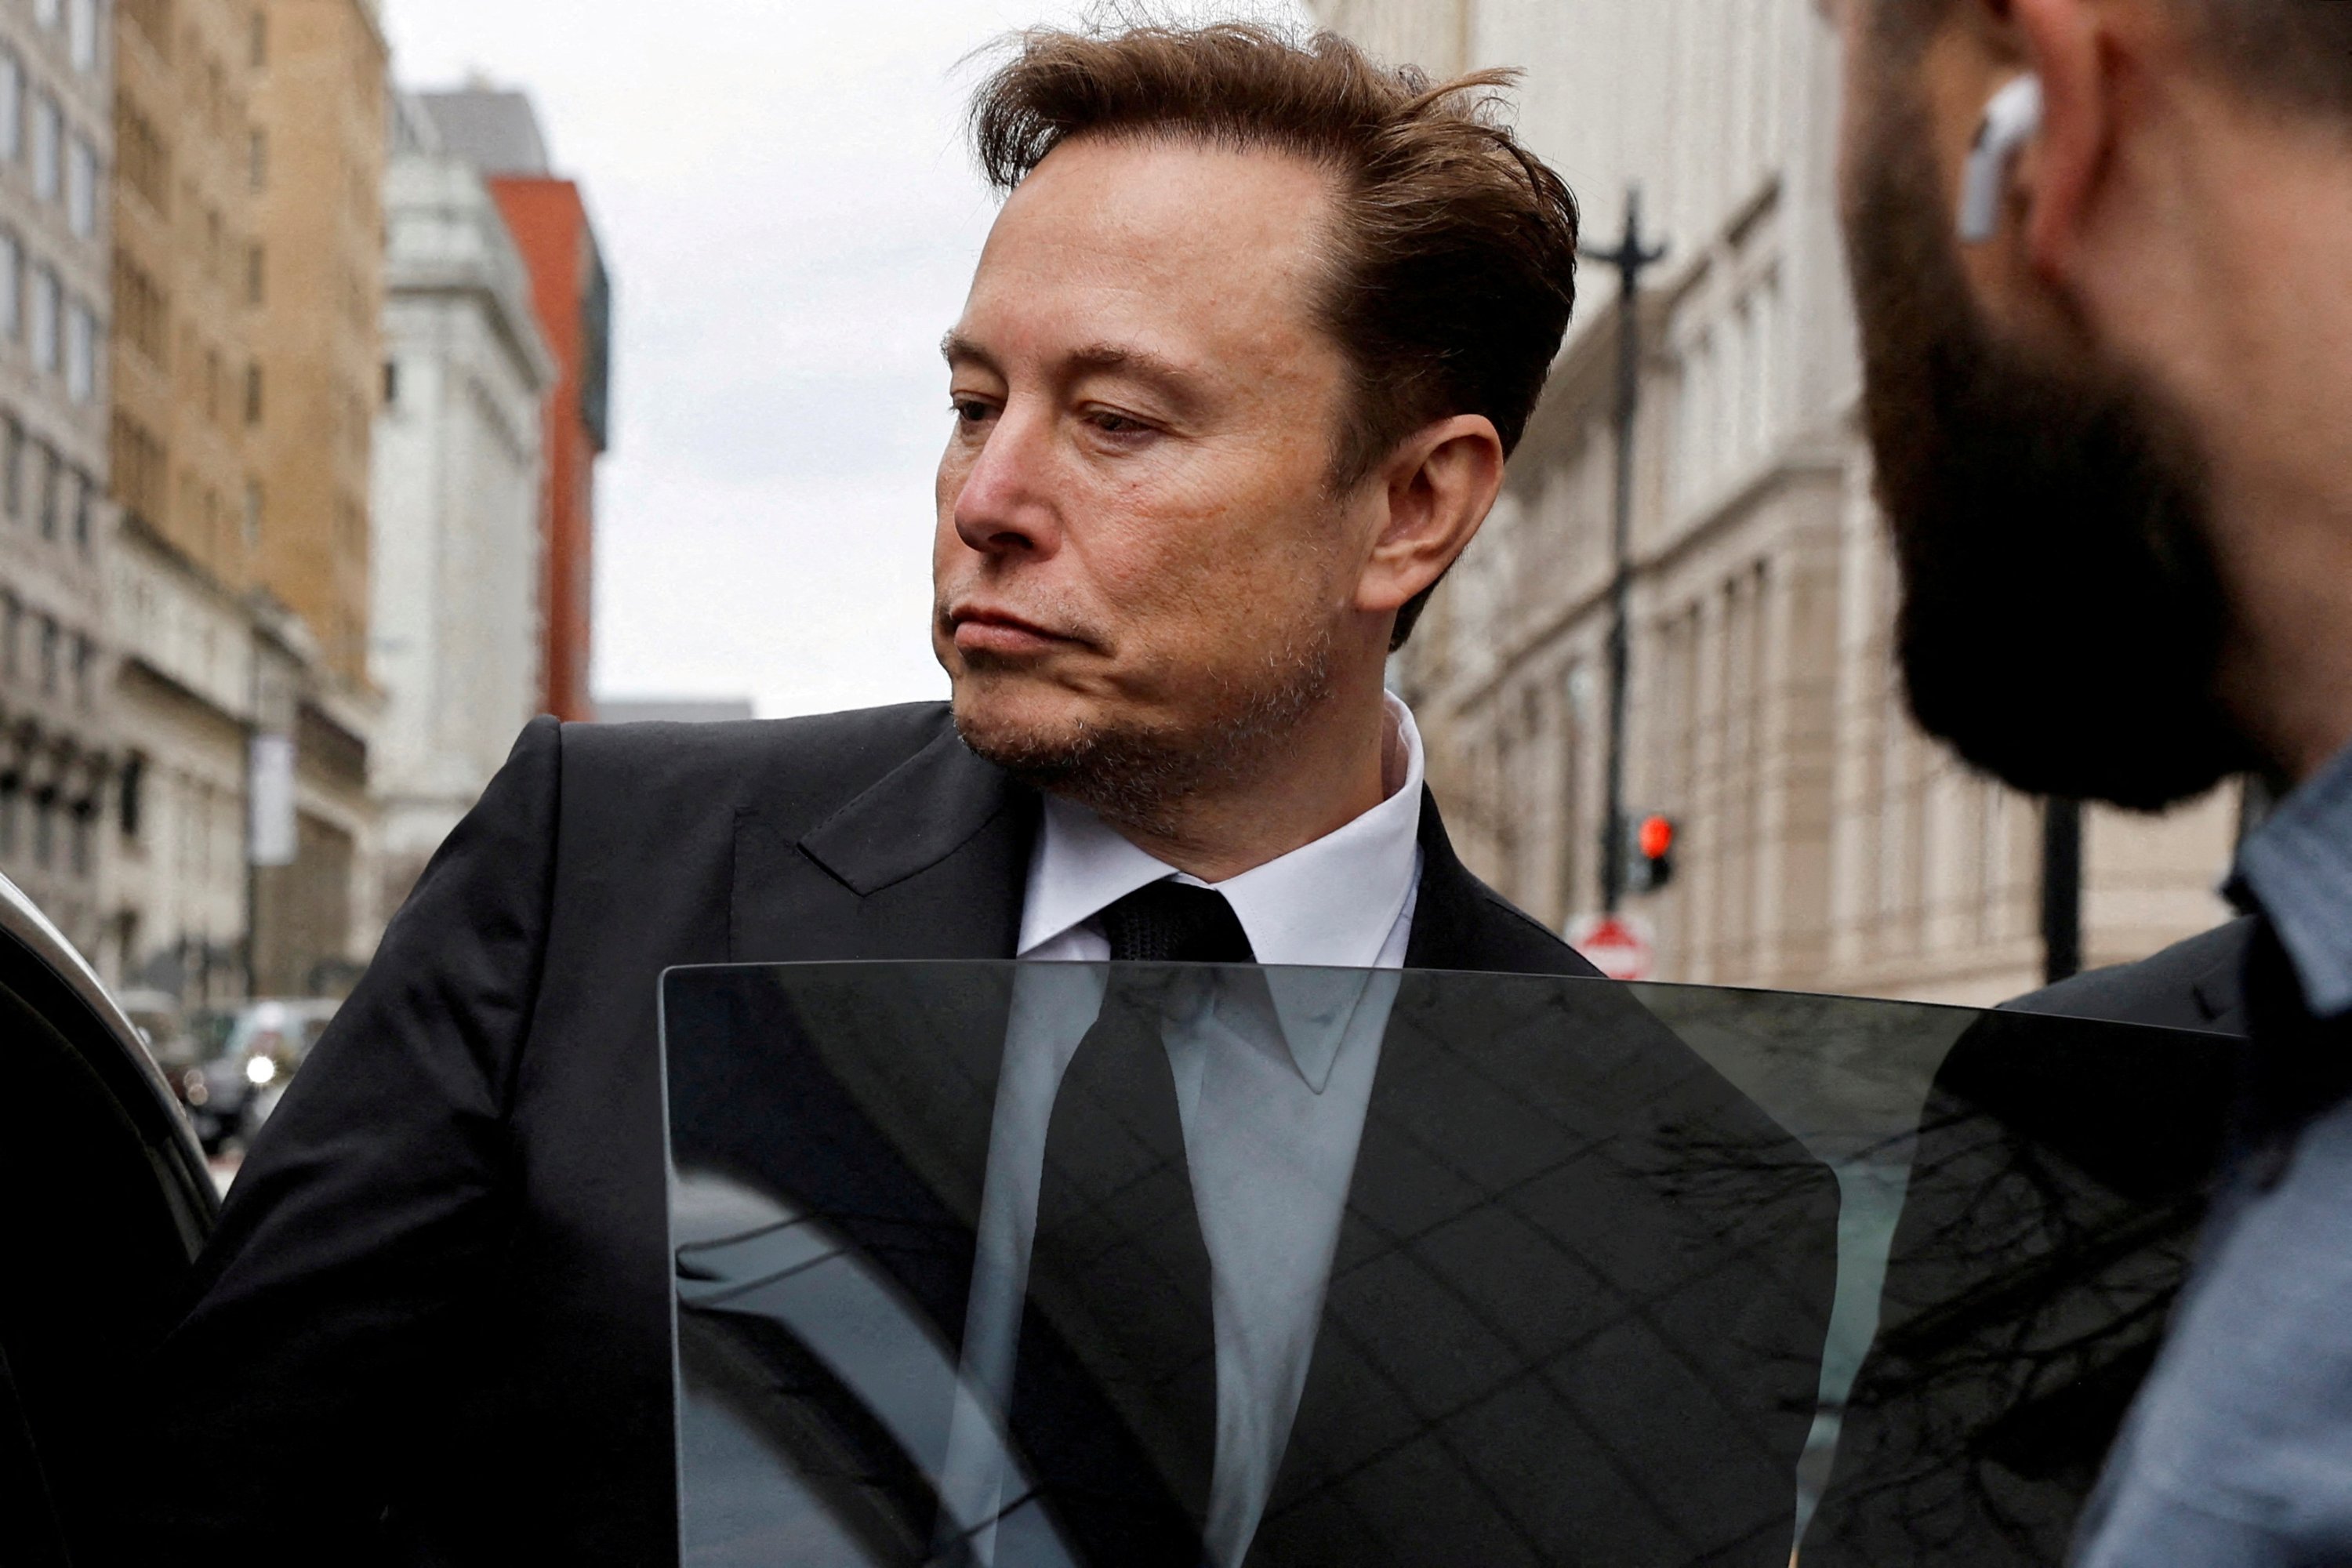 Tesla CEO Elon Musk and his security detail depart the company’s local office in Washington, U.S. Jan. 27, 2023. (Reuters Photo)